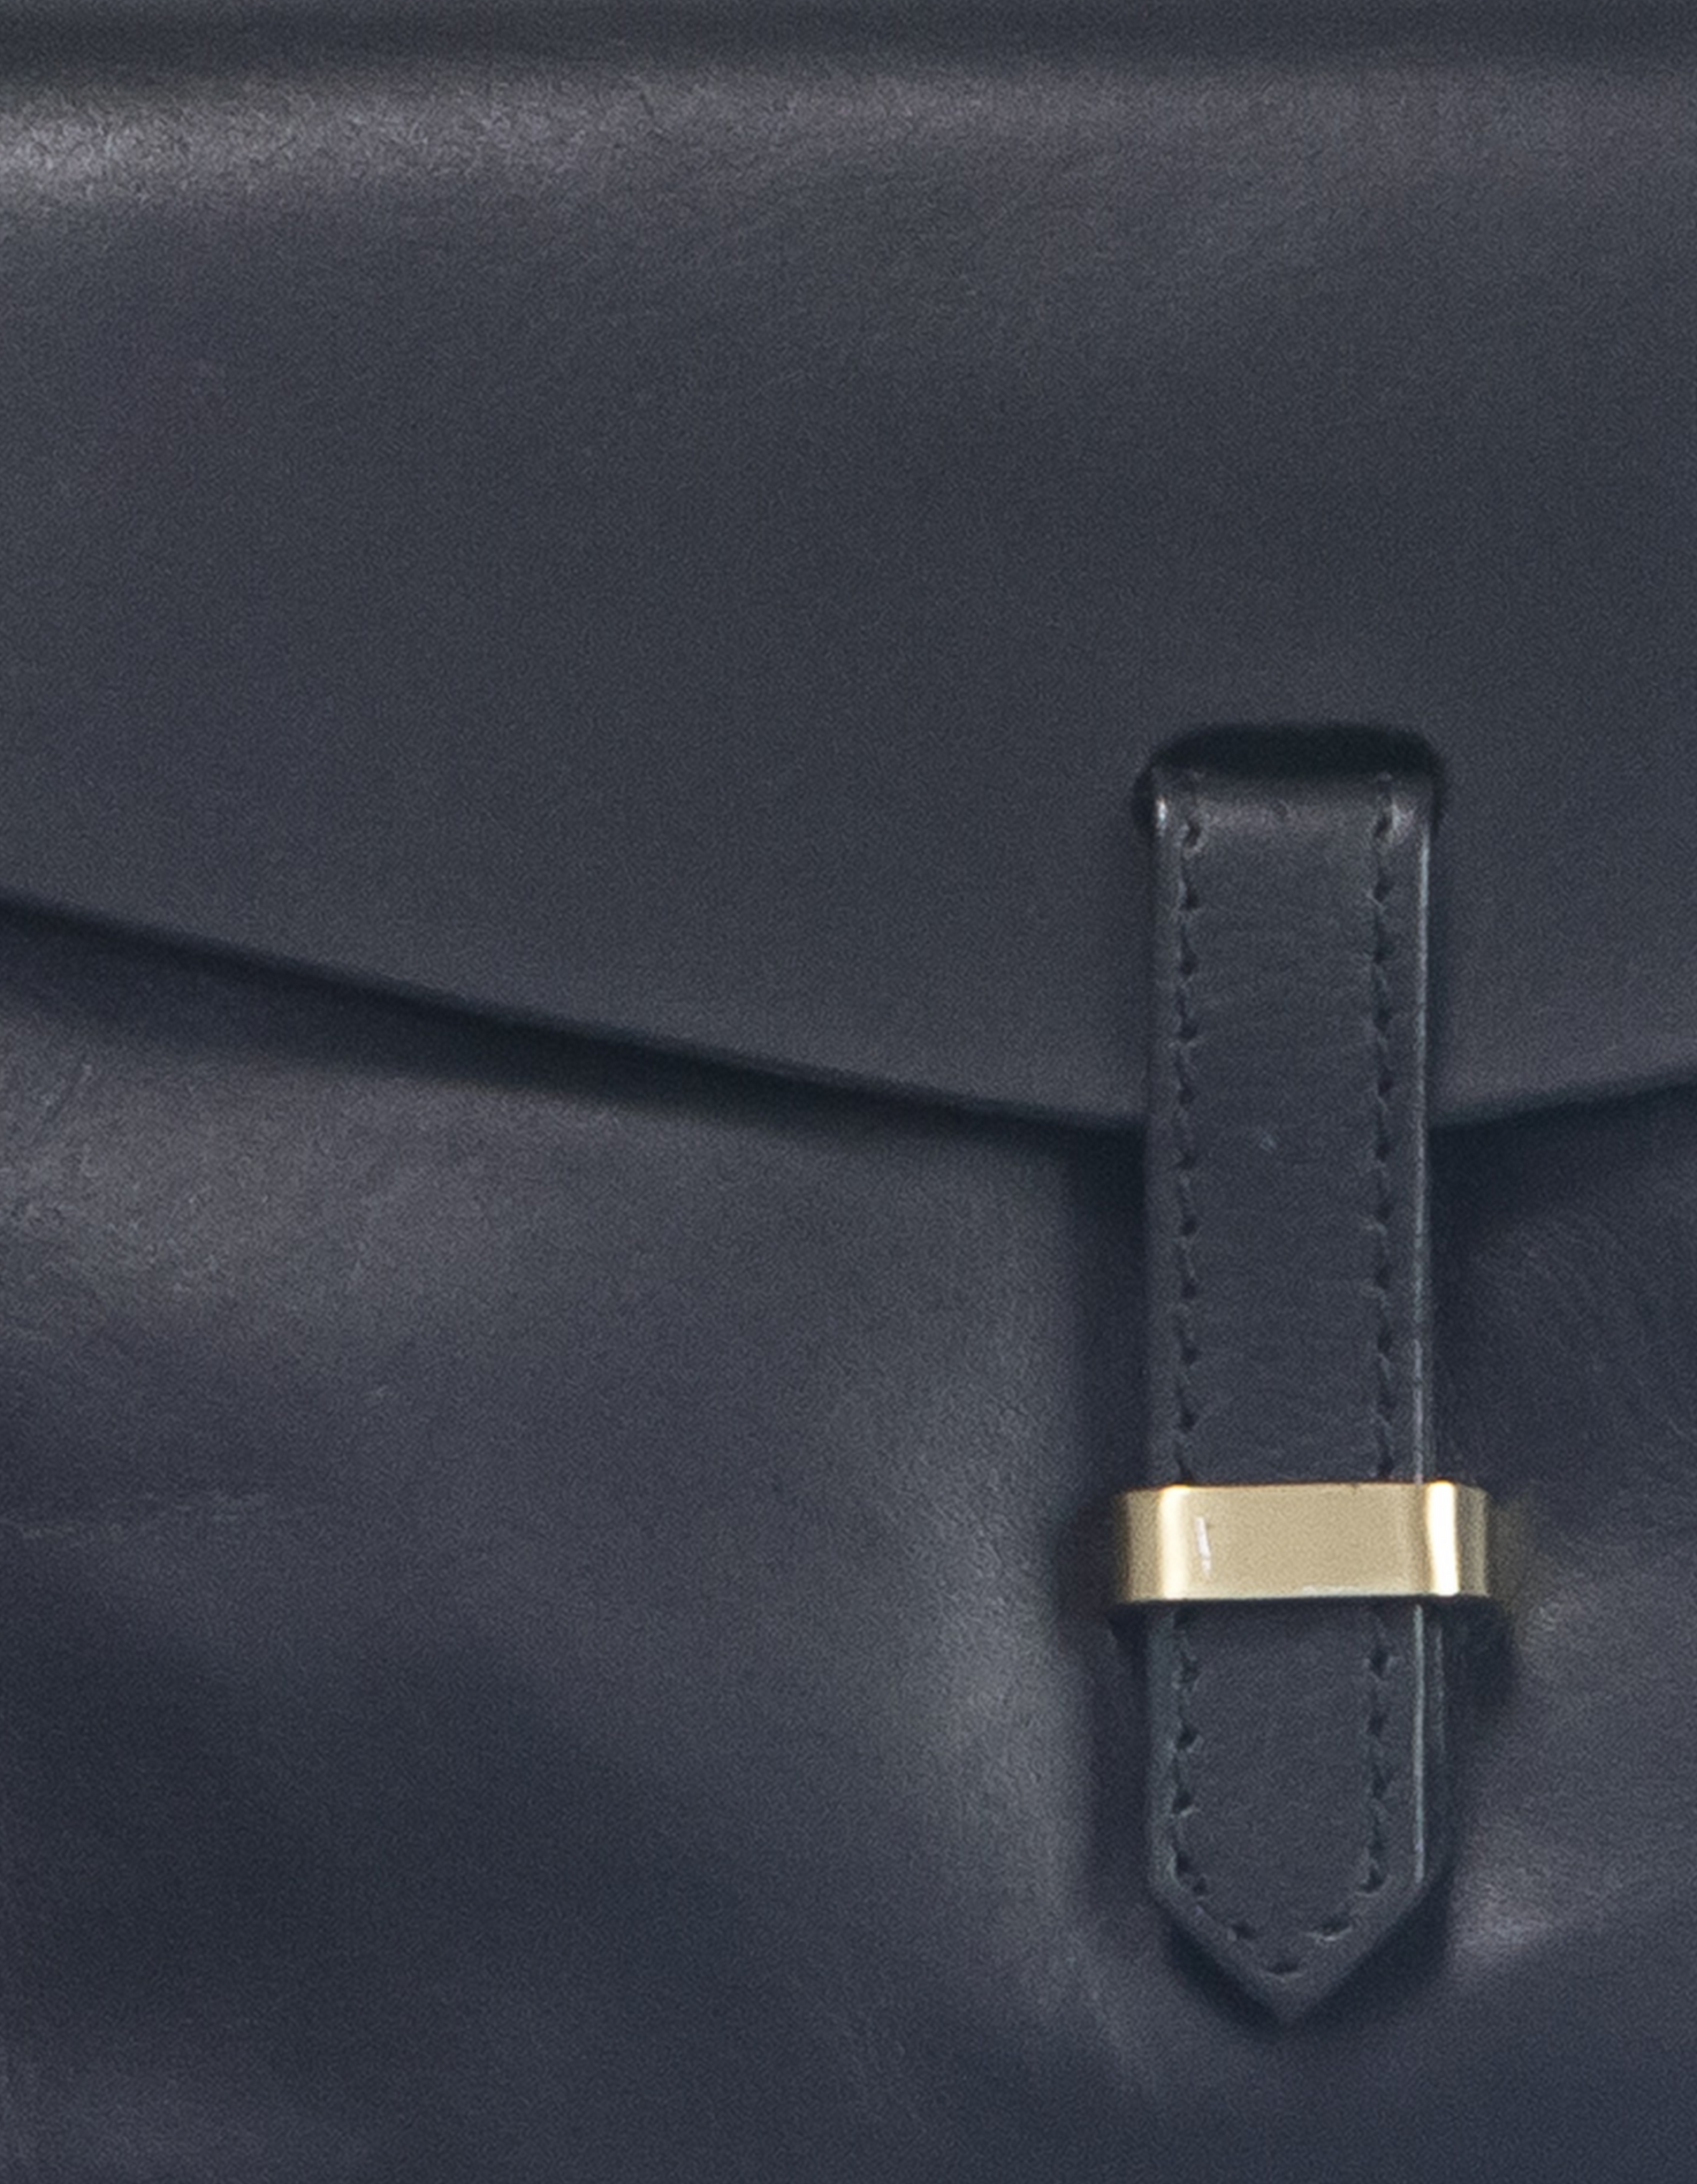 Women's sustainable leather crossbody bag, zoomed in view